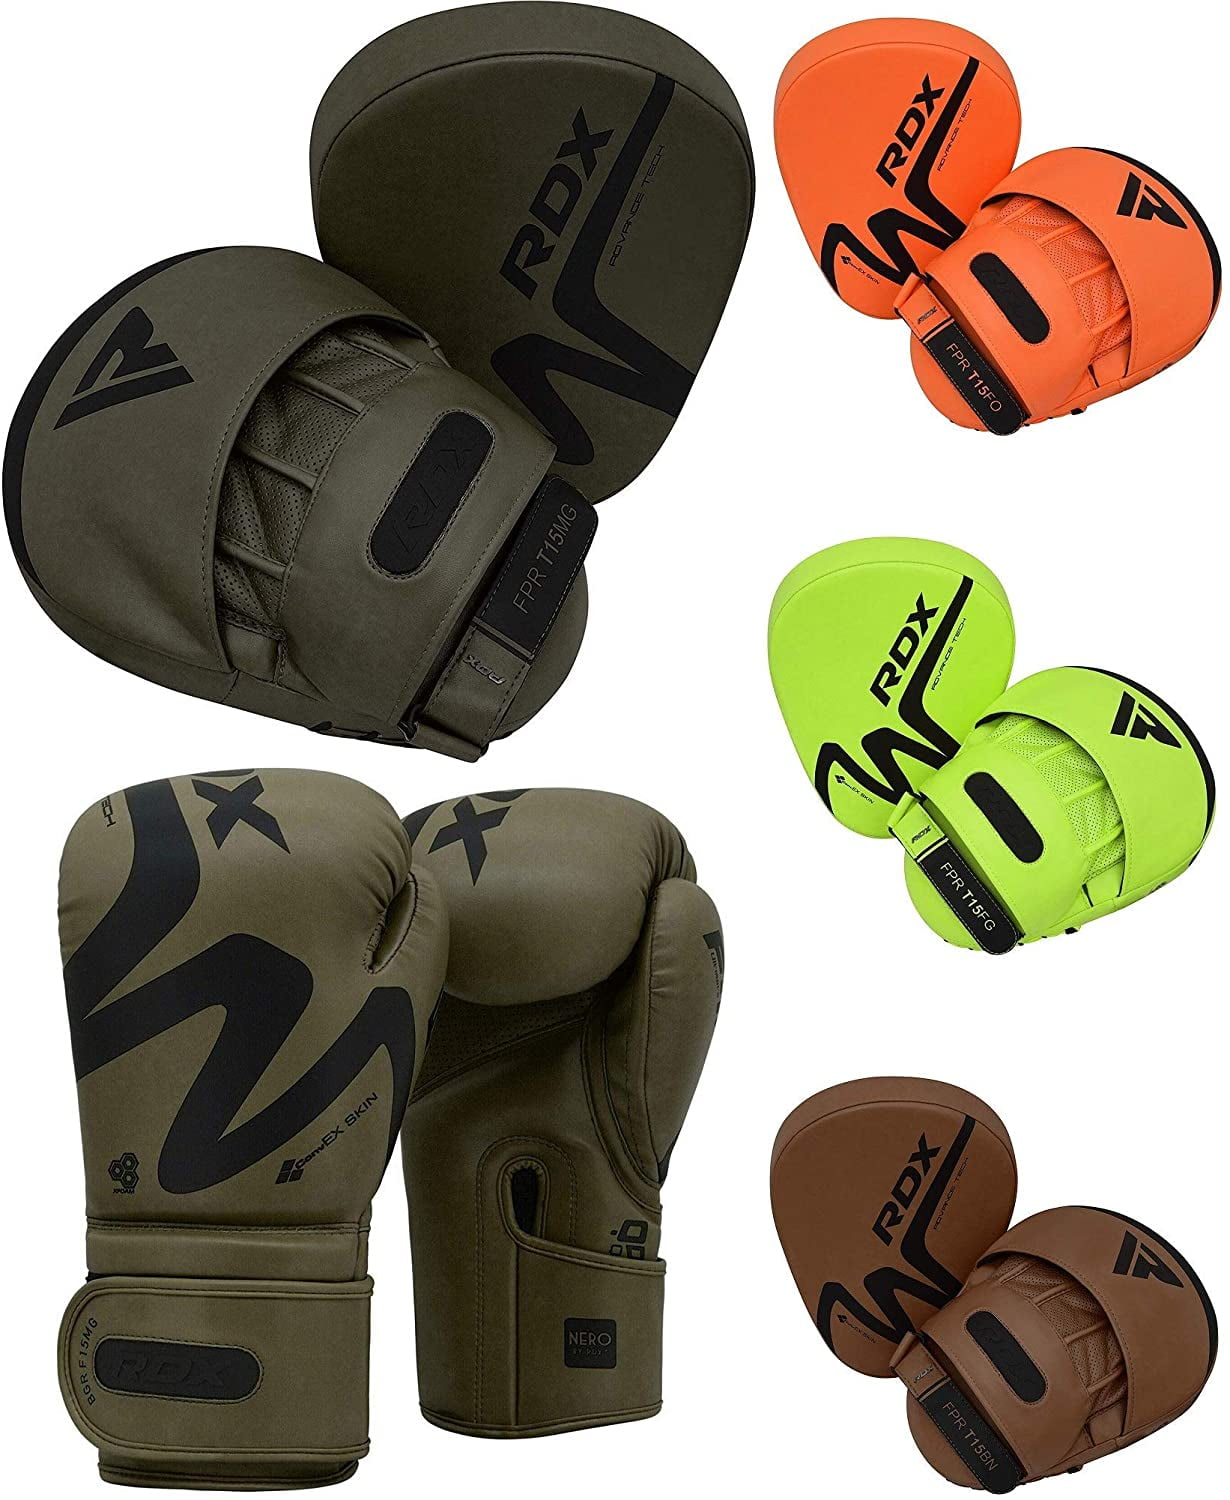 Sporteq Curved Focus Boxing Pads Hook and Jab Mitts Kick MMA & Punching Gloves 